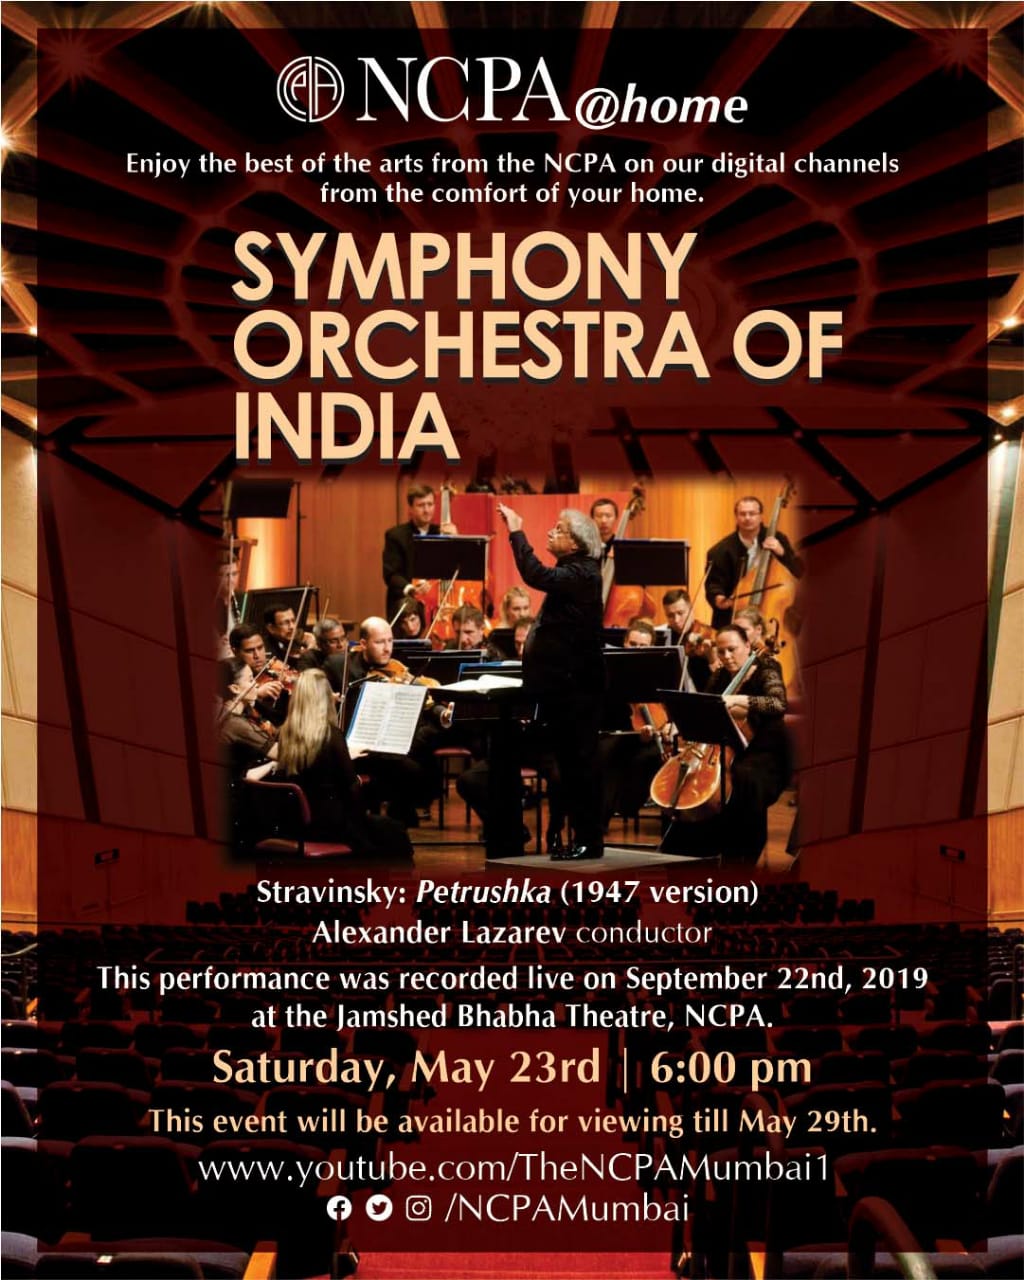 NCPA@home presents a spellbinding performance by the Symphony Orchestra of India with Russia’s foremost conductor Alexander Lazarev decoding=